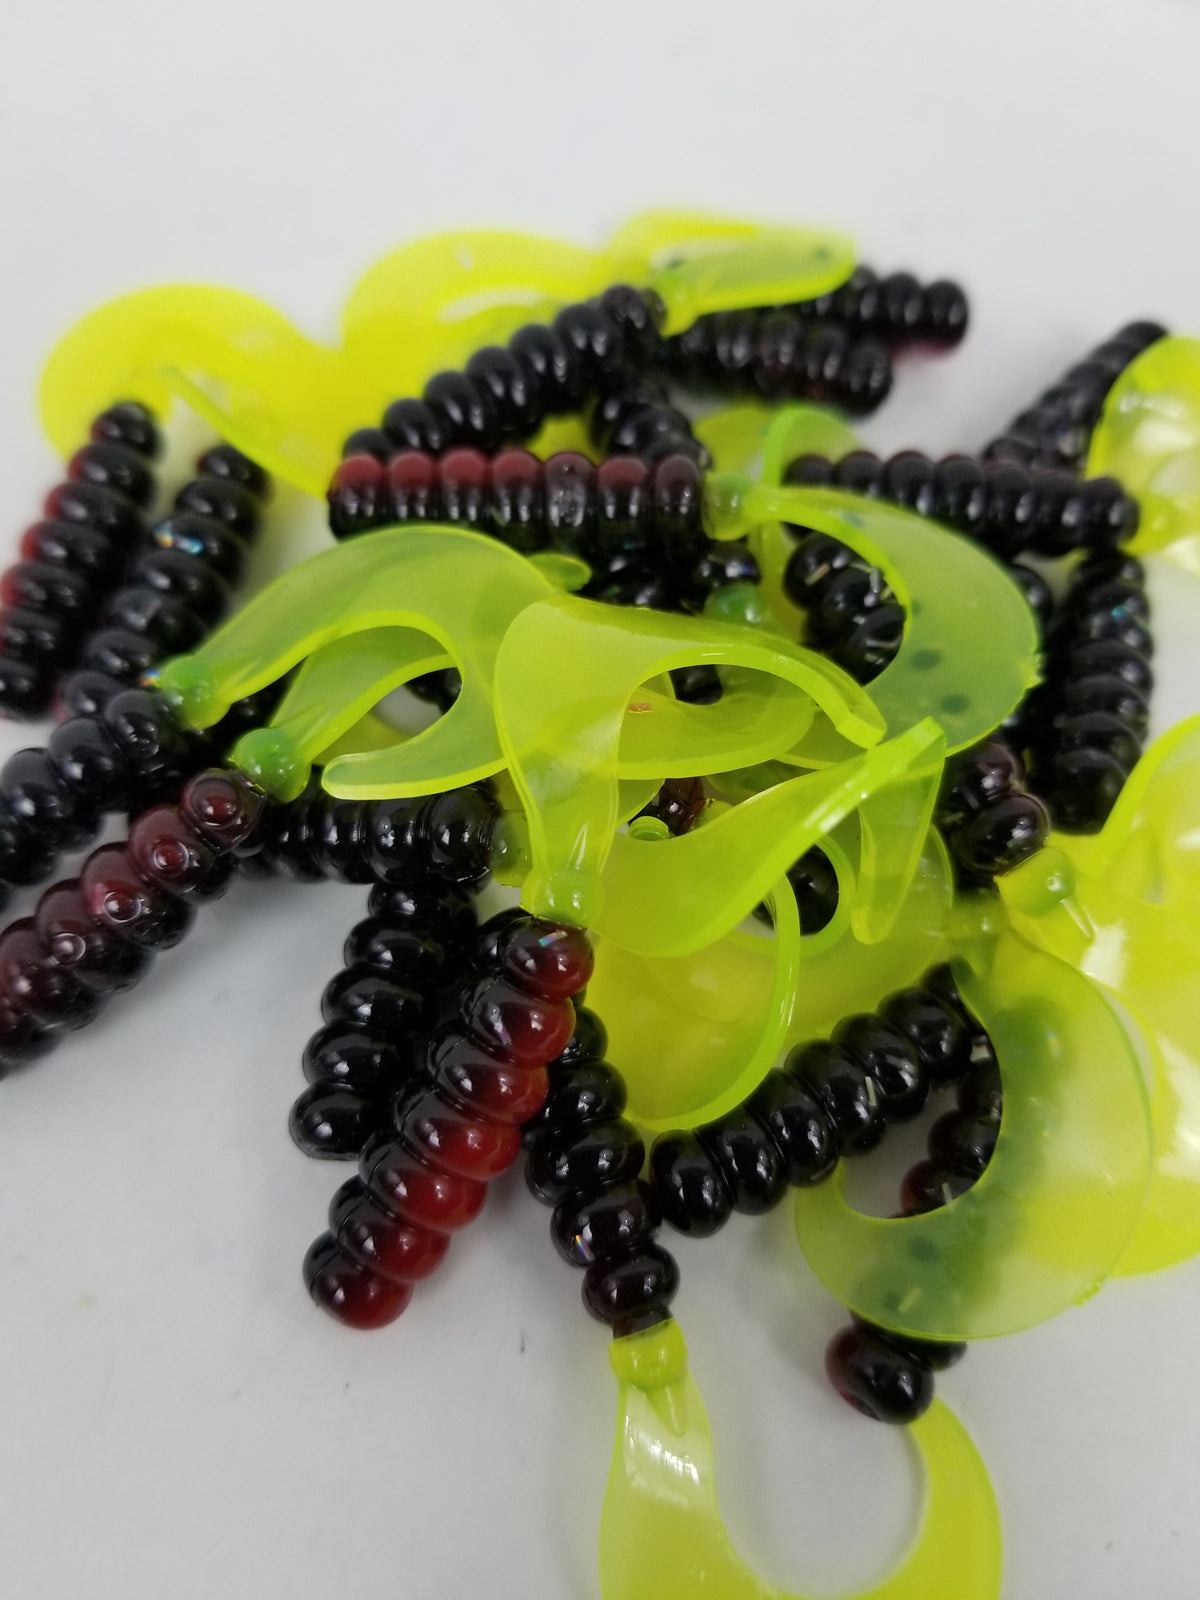 2023 Cam's 2"(HOLOGRAM FLAKE)  Curly Tail Grub 40pc Red Black & Chartreuse Curly Tail Crappie Soft Jigs  [A Cam's Exclusive]